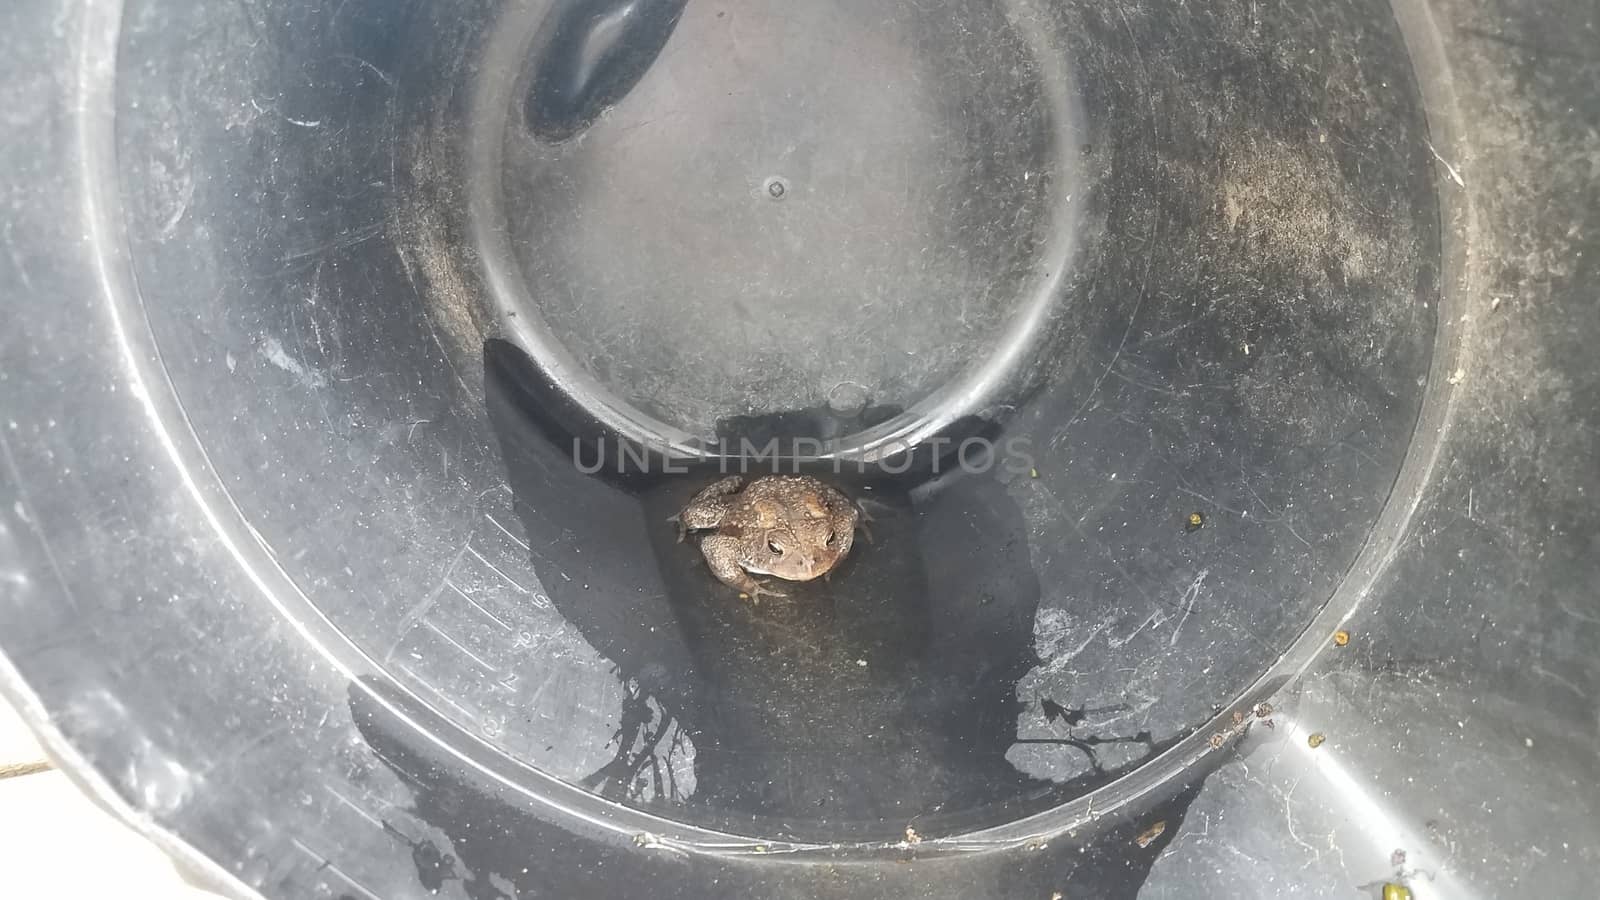 brown frog or toad in black plastic bucket with water by stockphotofan1